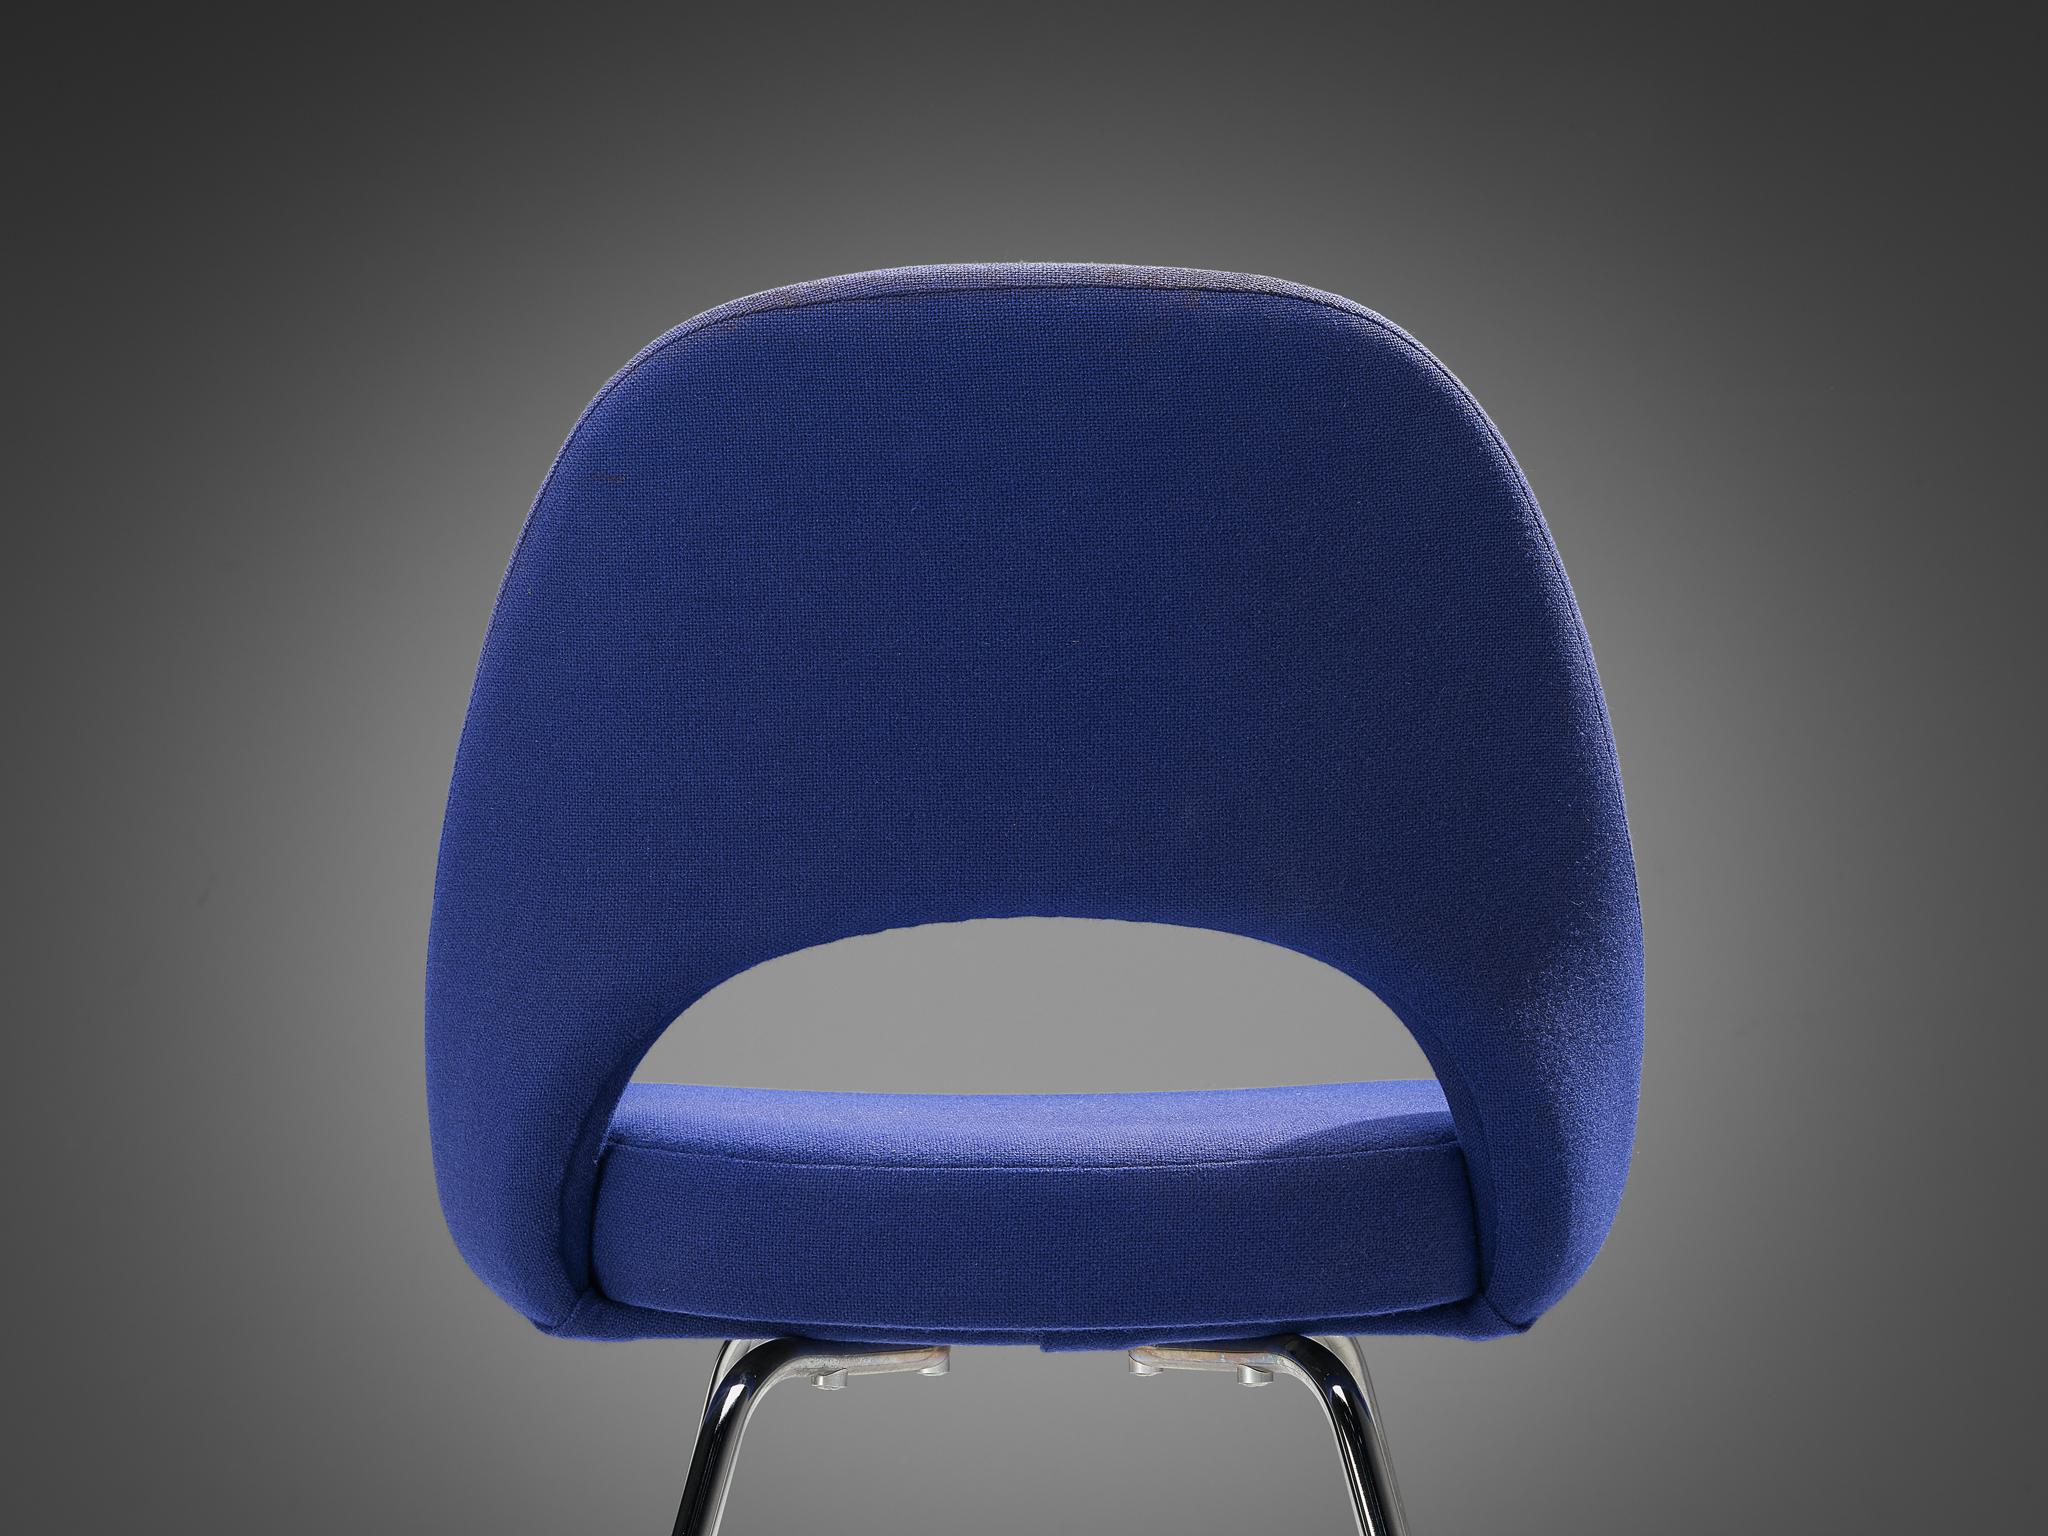 Eero Saarinen for Knoll Set of Four Dining Chairs in Blue Upholstery  (amerikanisch) im Angebot